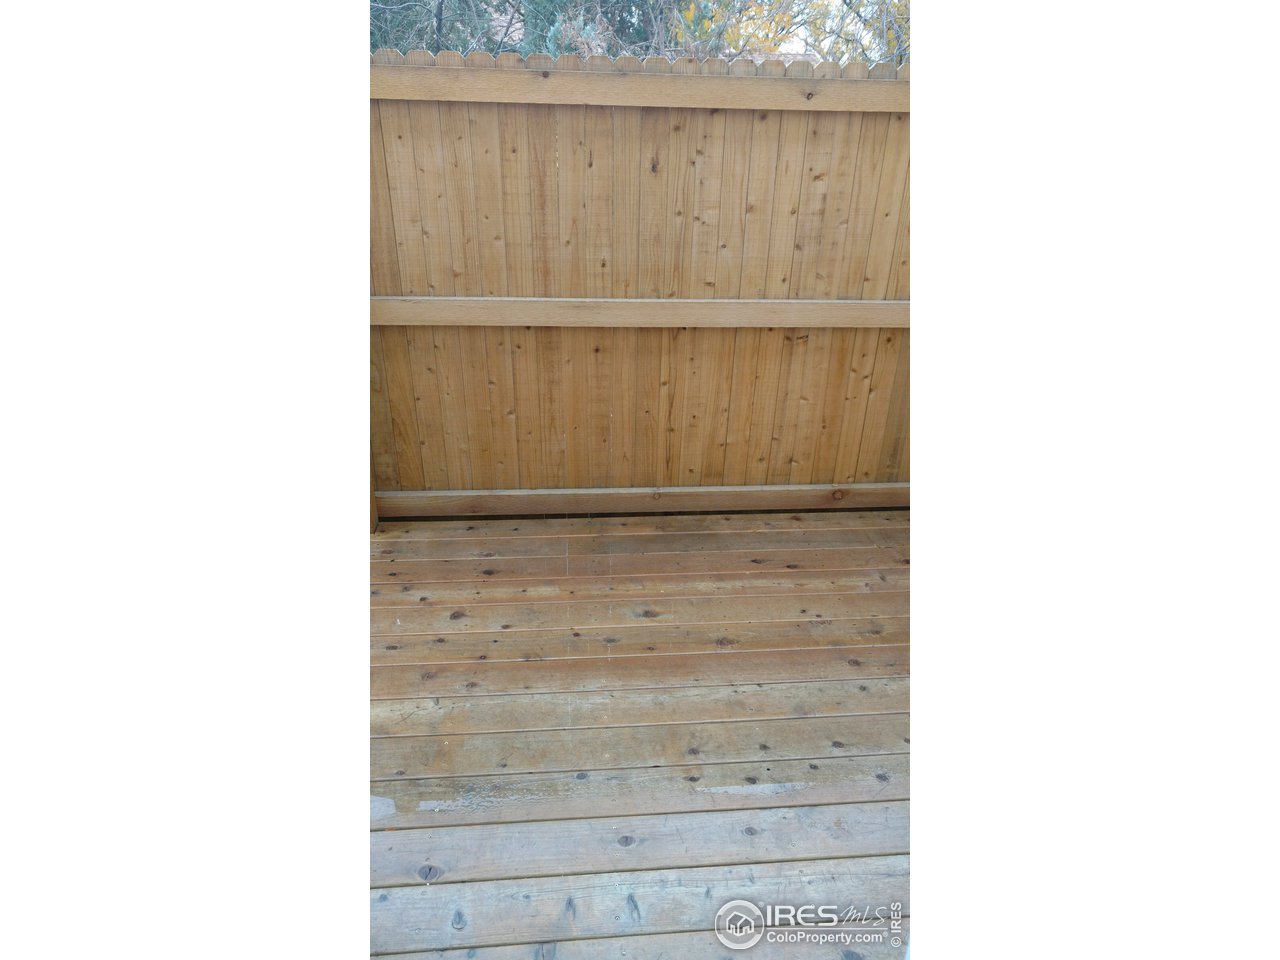 Wood deck and fencing